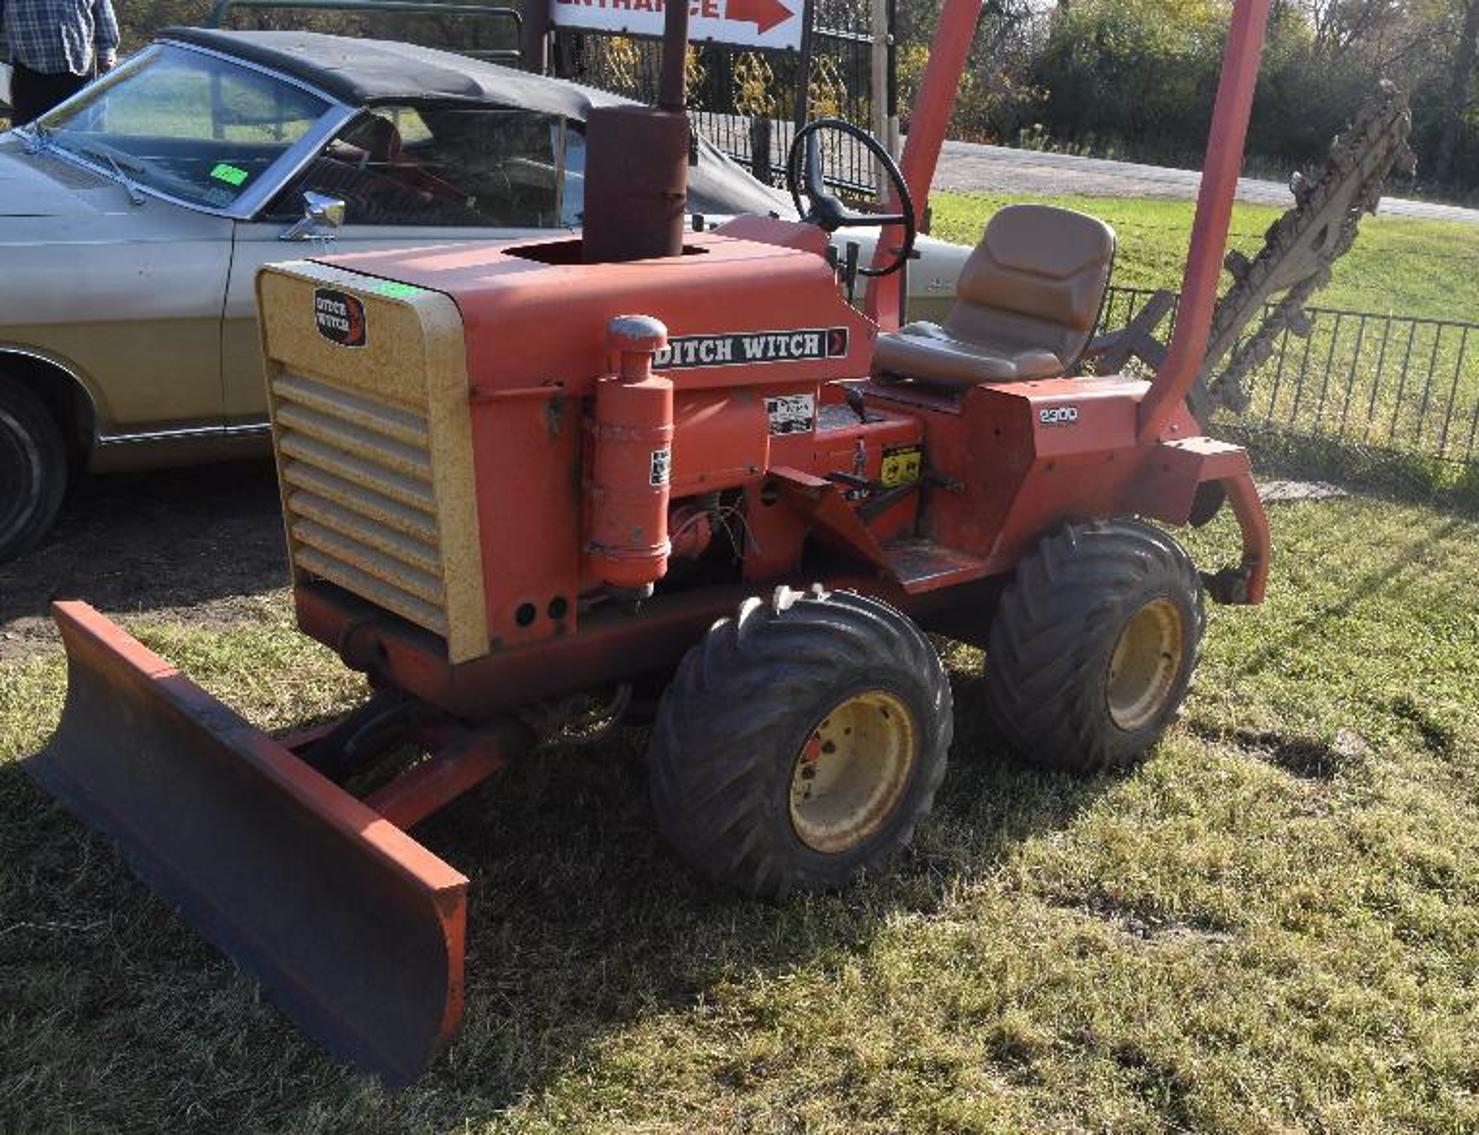 Gene Staniszewski Fall Auction: Tractors, Trucks and Collectibles